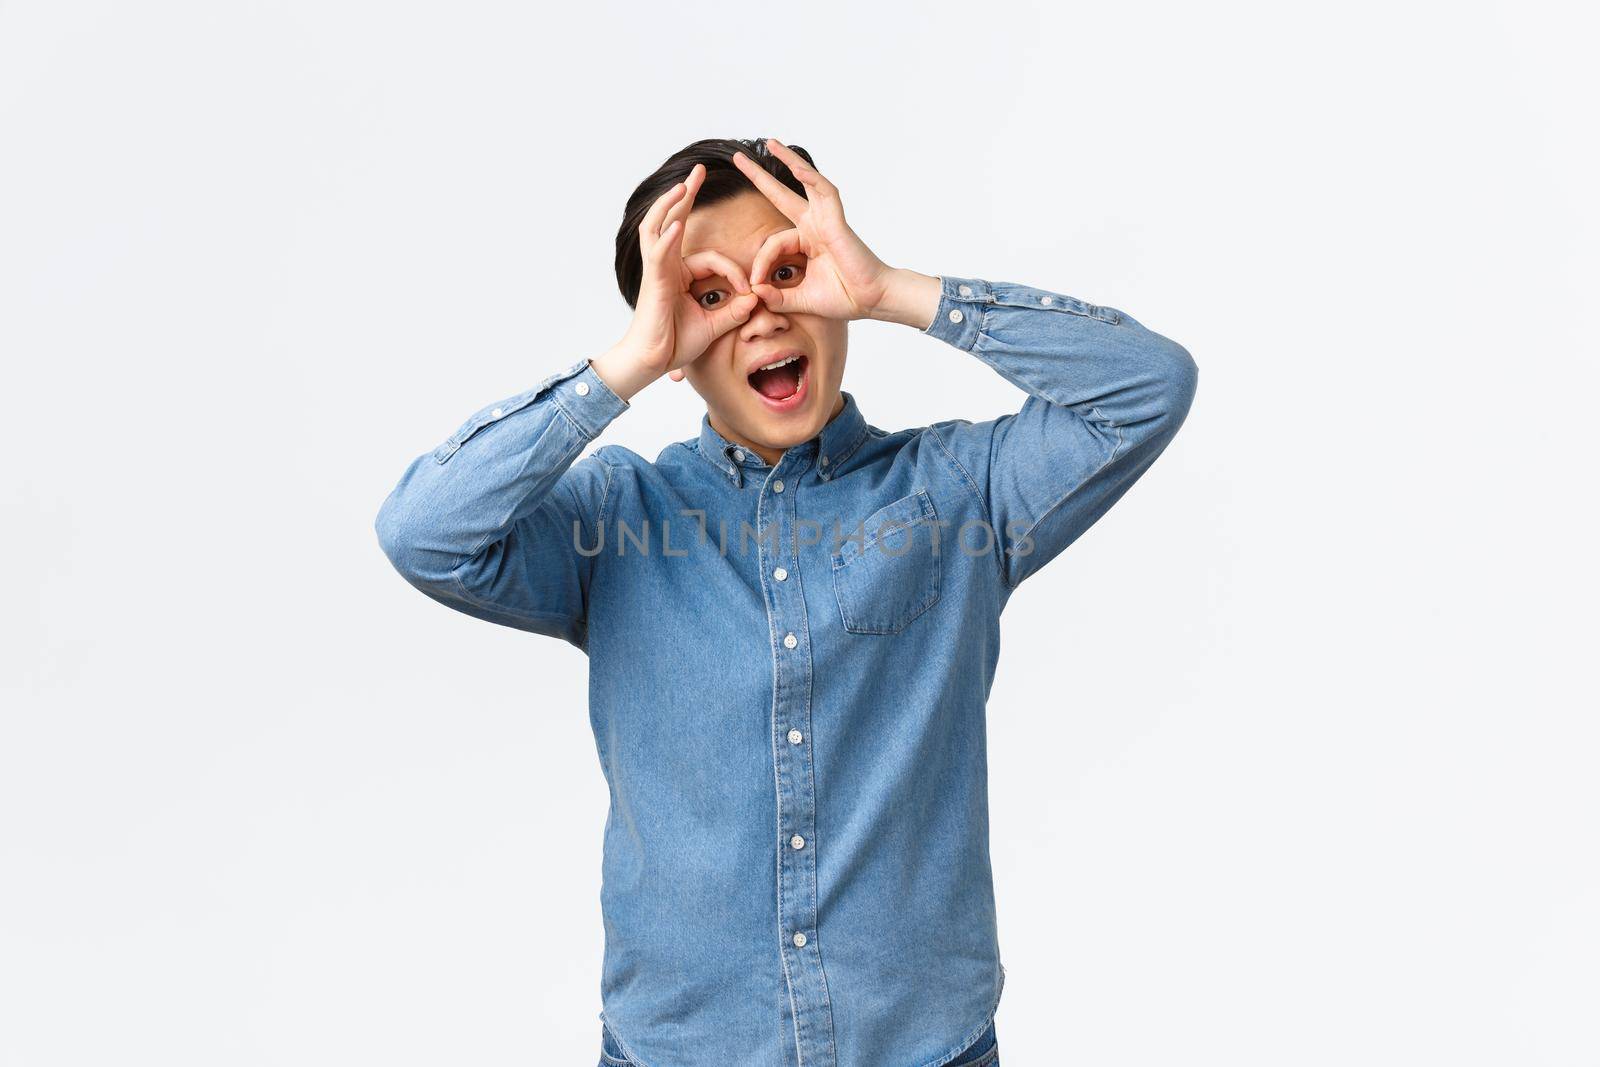 Funny and upbeat, playful asian man making faces, showing fake glasses with hands over eyes, mocking someone, playing, seeing something exciting, standing white background.